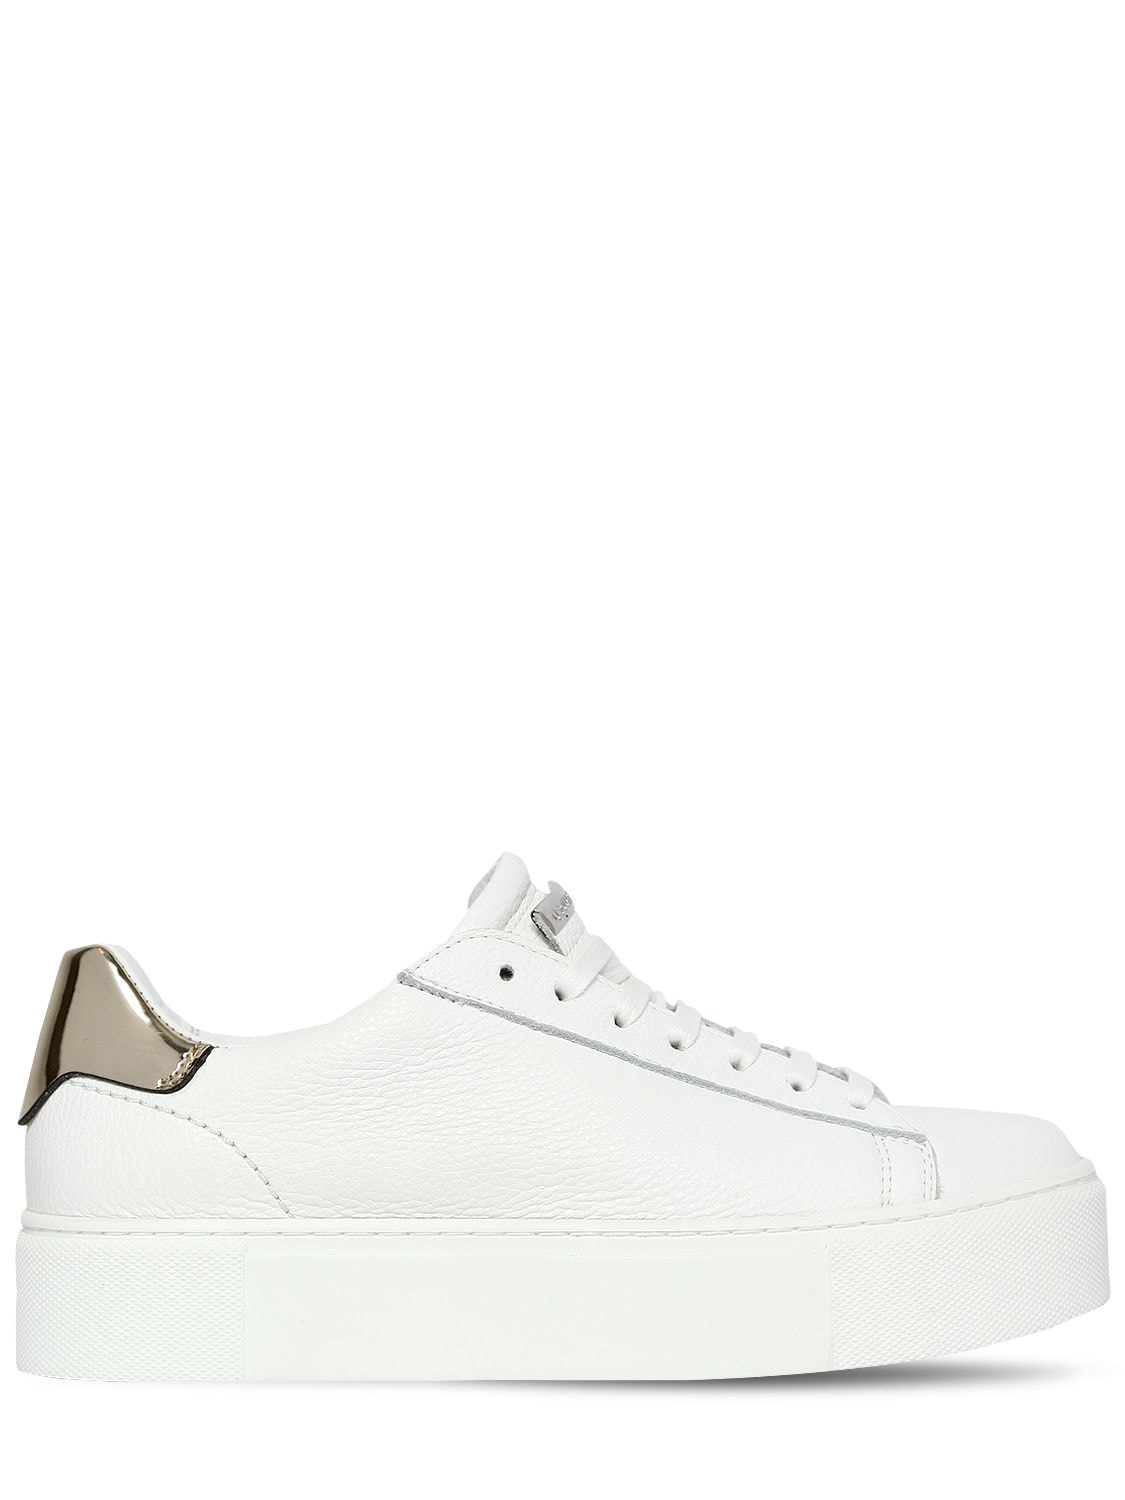 Dsquared2 40mm Tennis Leather Platform Trainers In White/silver